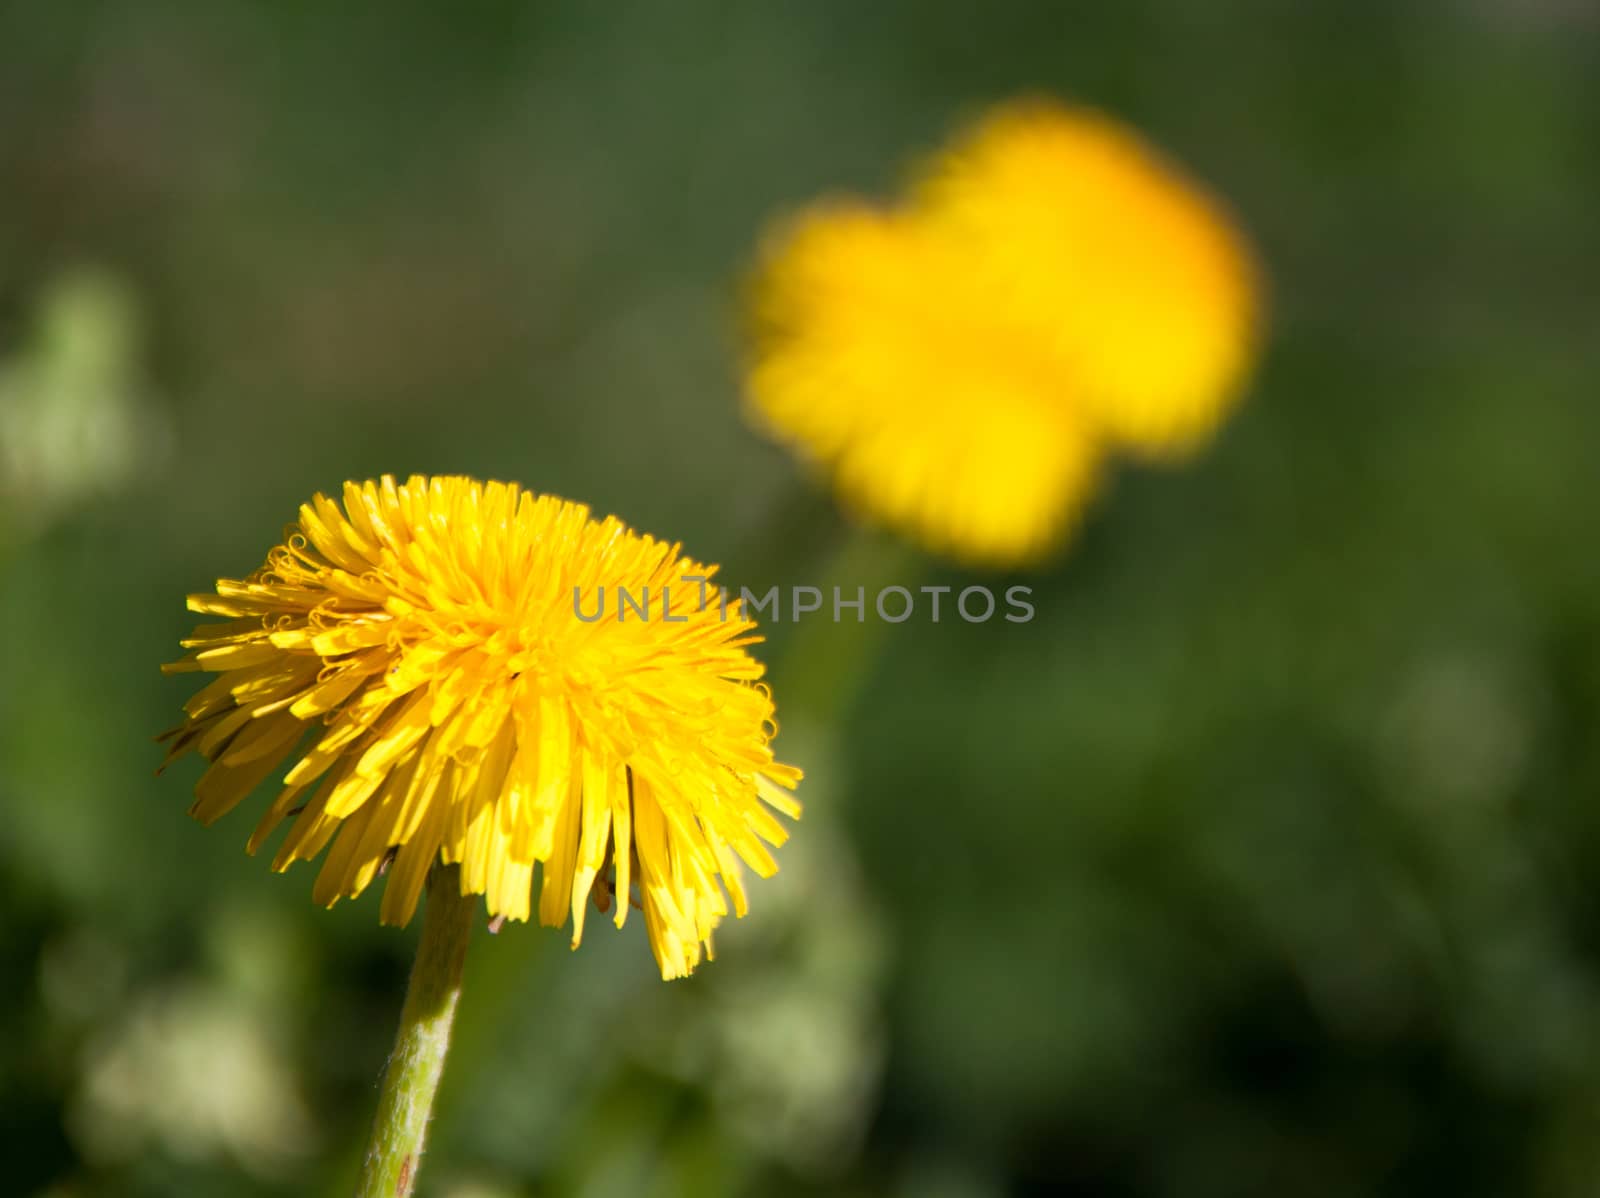 Close up of dandelion. The background also shows more dandelions.